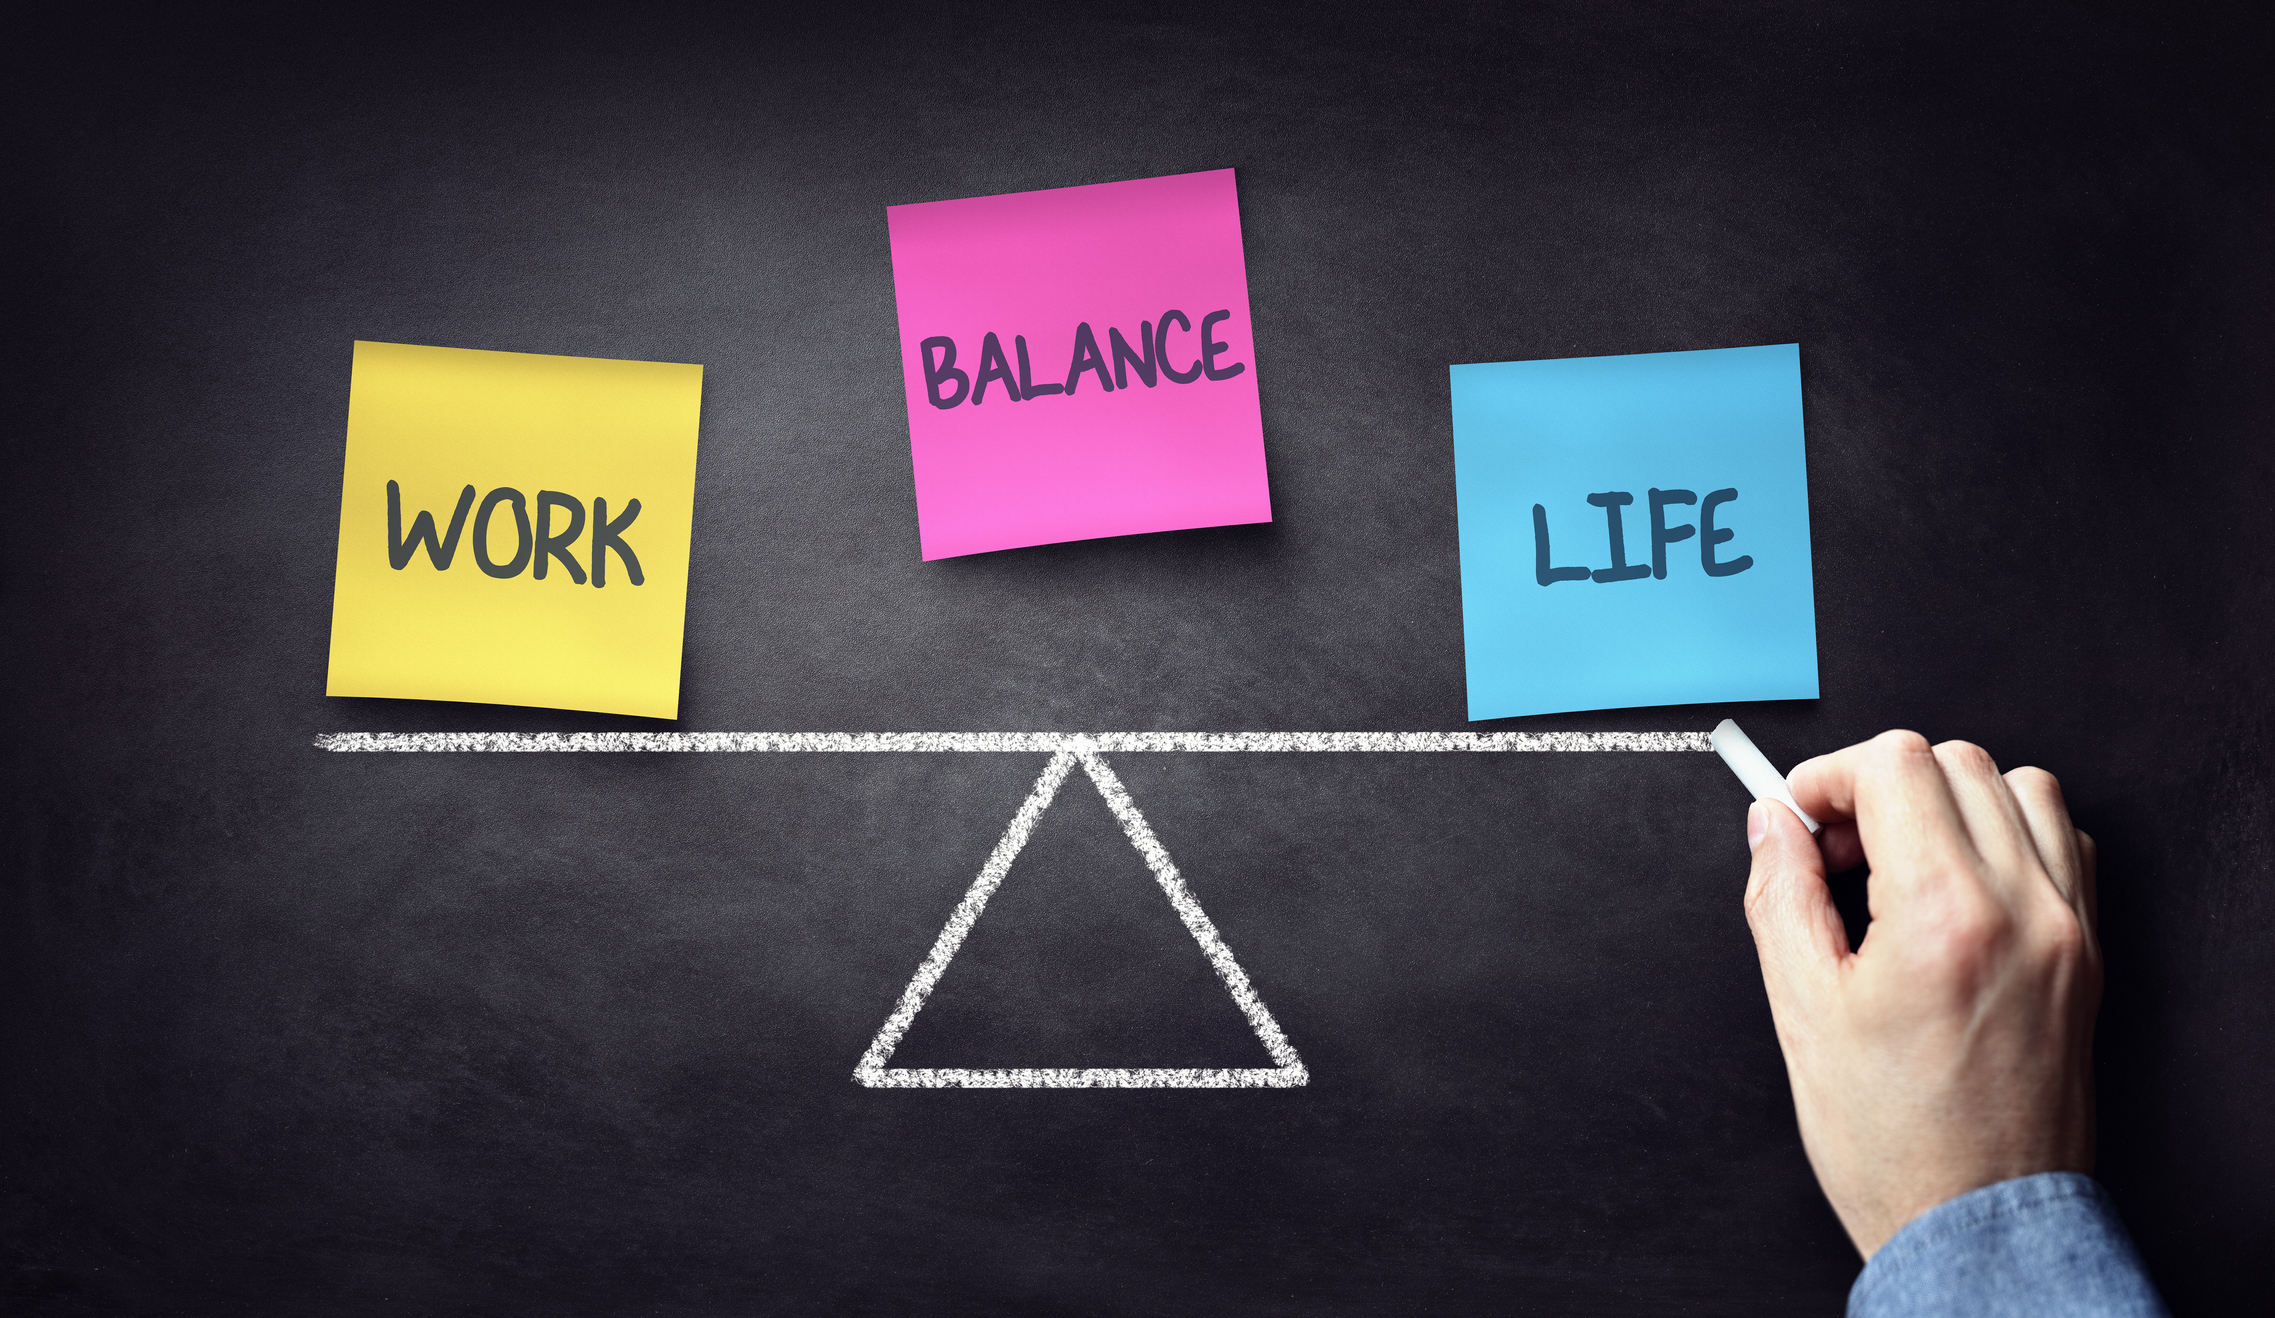 Work, Balance and Life - How to achieve work-life balance and high productivity 